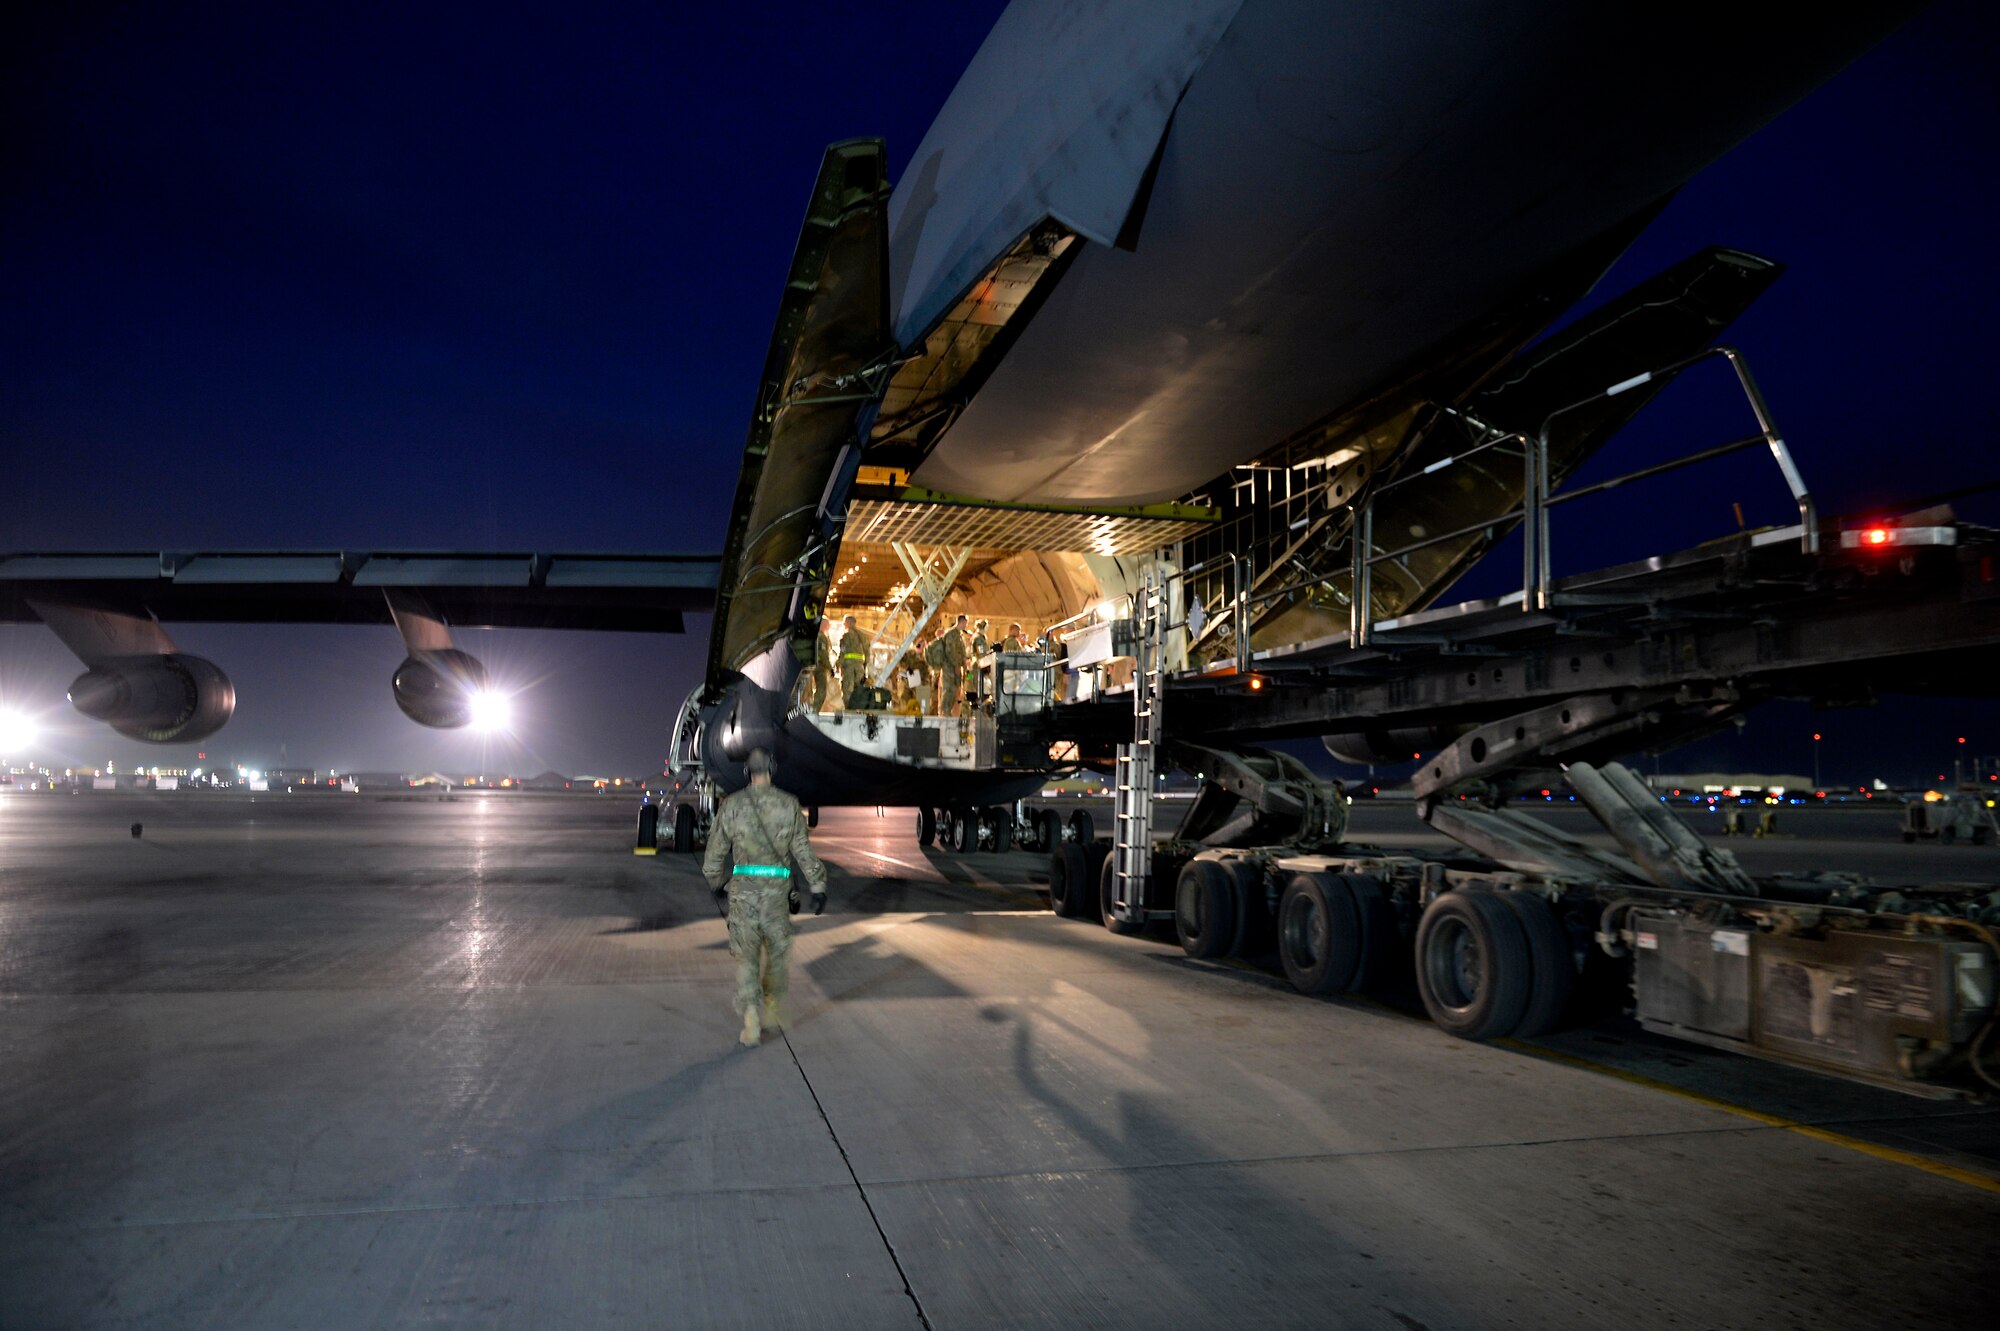 U.S. Air Force Airmen with the 455th Expeditionary Aerial Port Squadron load cargo into a C-17 Globemaster III loadmaster Sept. 9, 2014. Airmen assigned to the 455 EAPS have serviced more than 14,300 missions and 114,700 short tons of cargo since the beginning of the year to support Operation Enduring Freedom. (U.S. Air Force photo by Staff Sgt. Evelyn Chavez/Released)